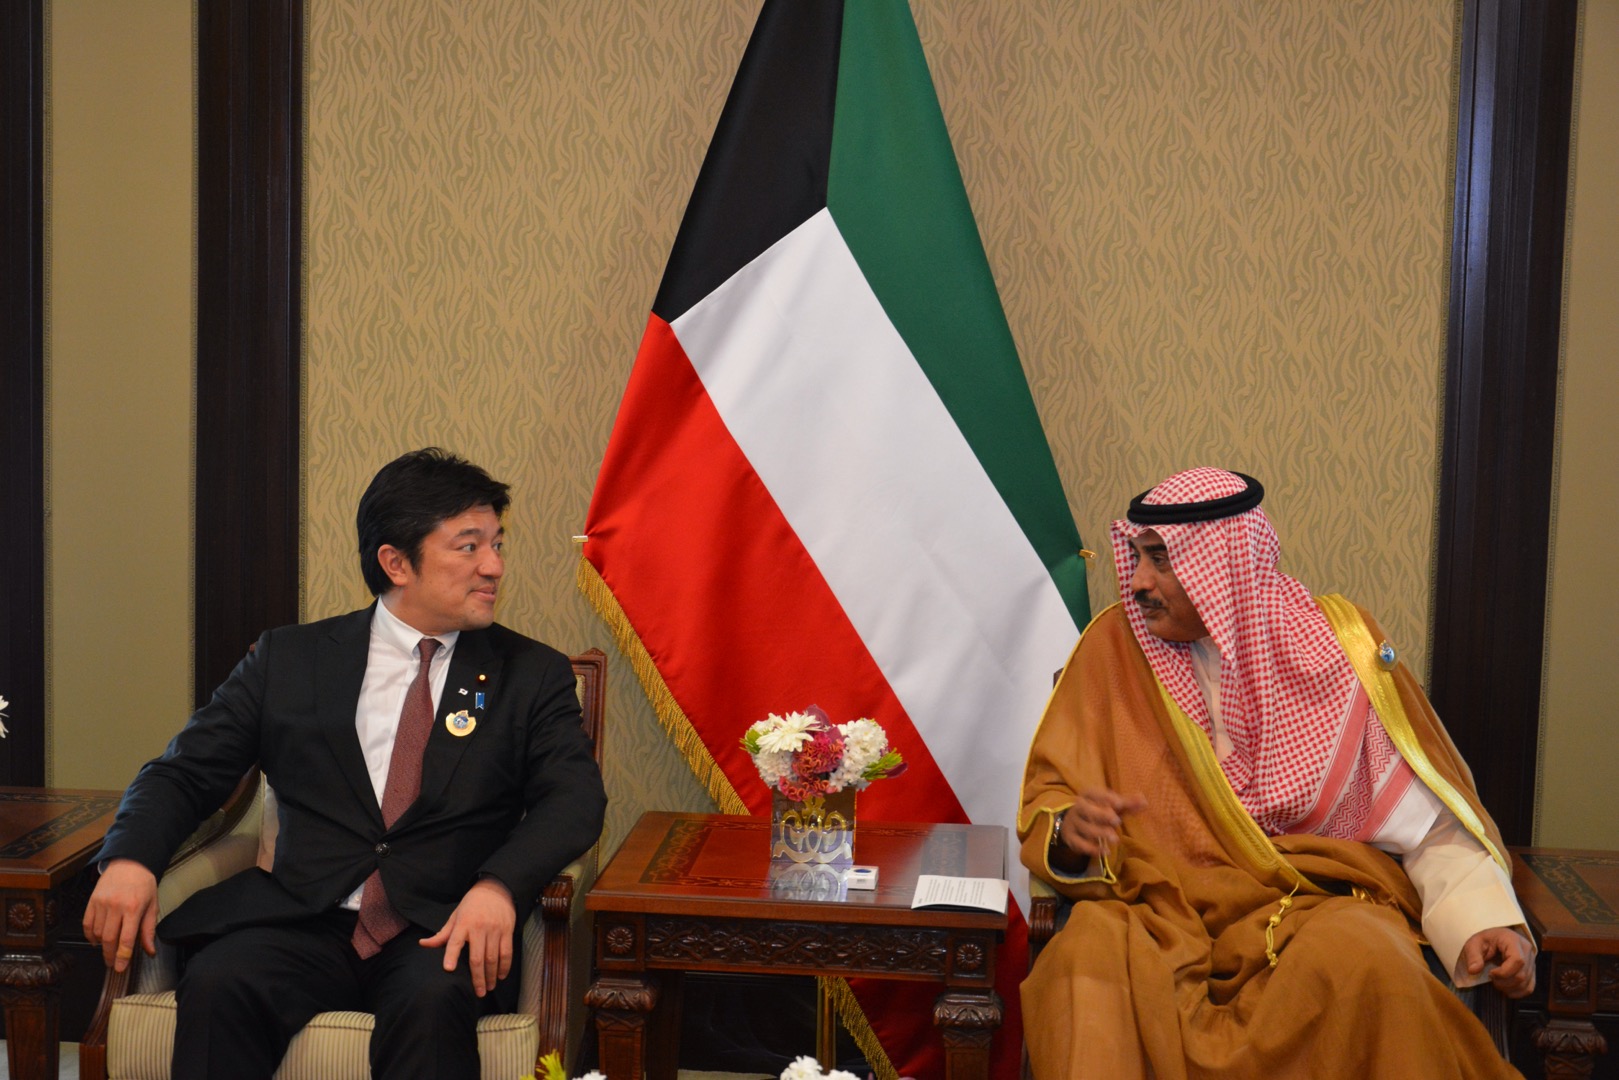 First Deputy Prime Minister and Foreign Minister Sheikh Sabah Khaled Al-Hamad Al-Sabah meets Japanese Minister of State for Foreign Affairs Yasuhide Nakayama